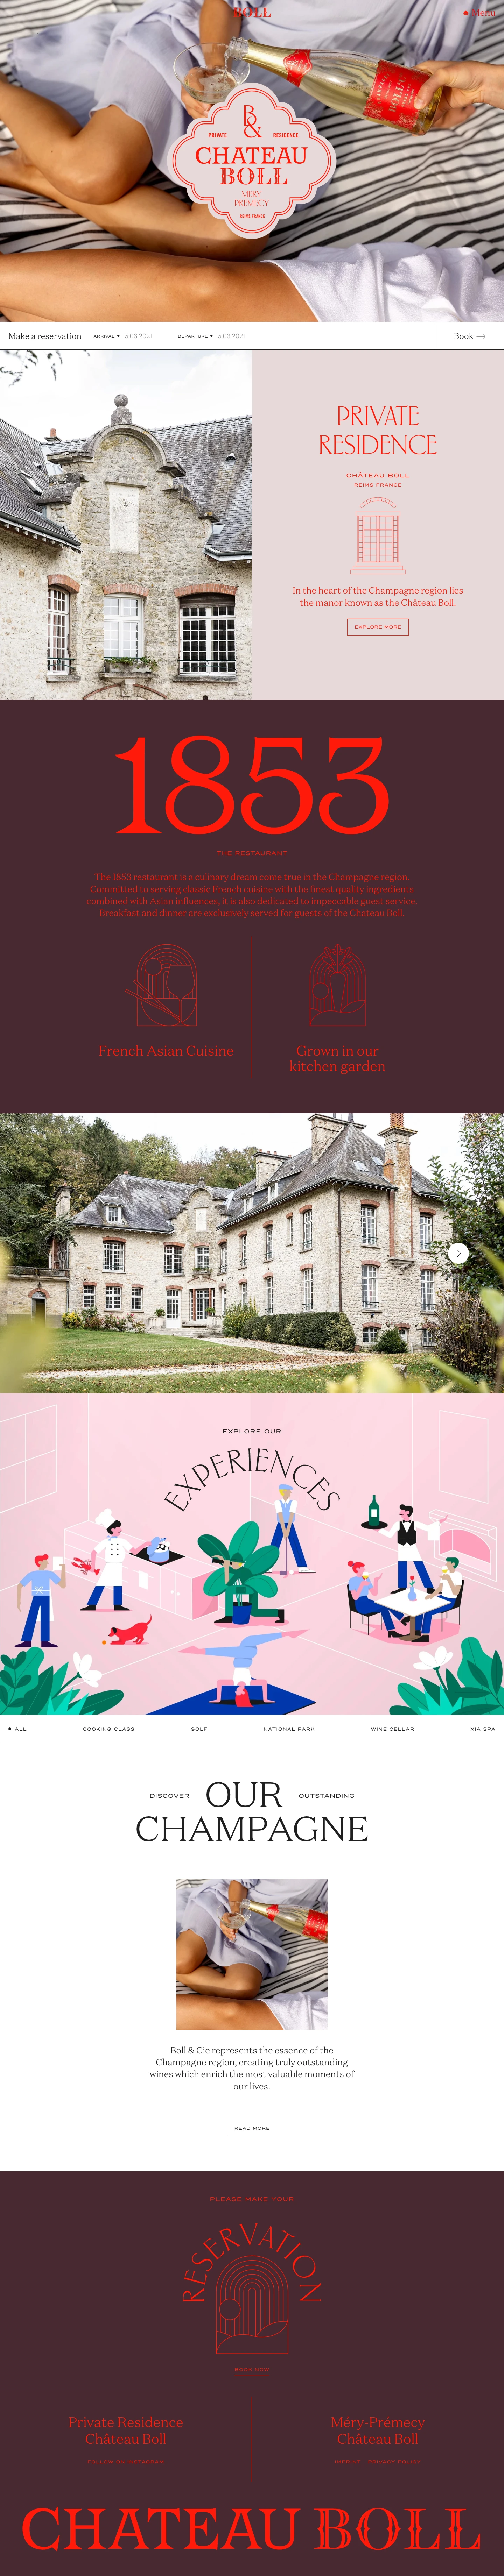 Château Boll Landing Page Example: In the heart of the Champagne region lies the manor known as the Château Boll. A place which lets you dream, enjoy and relax on the highest level.